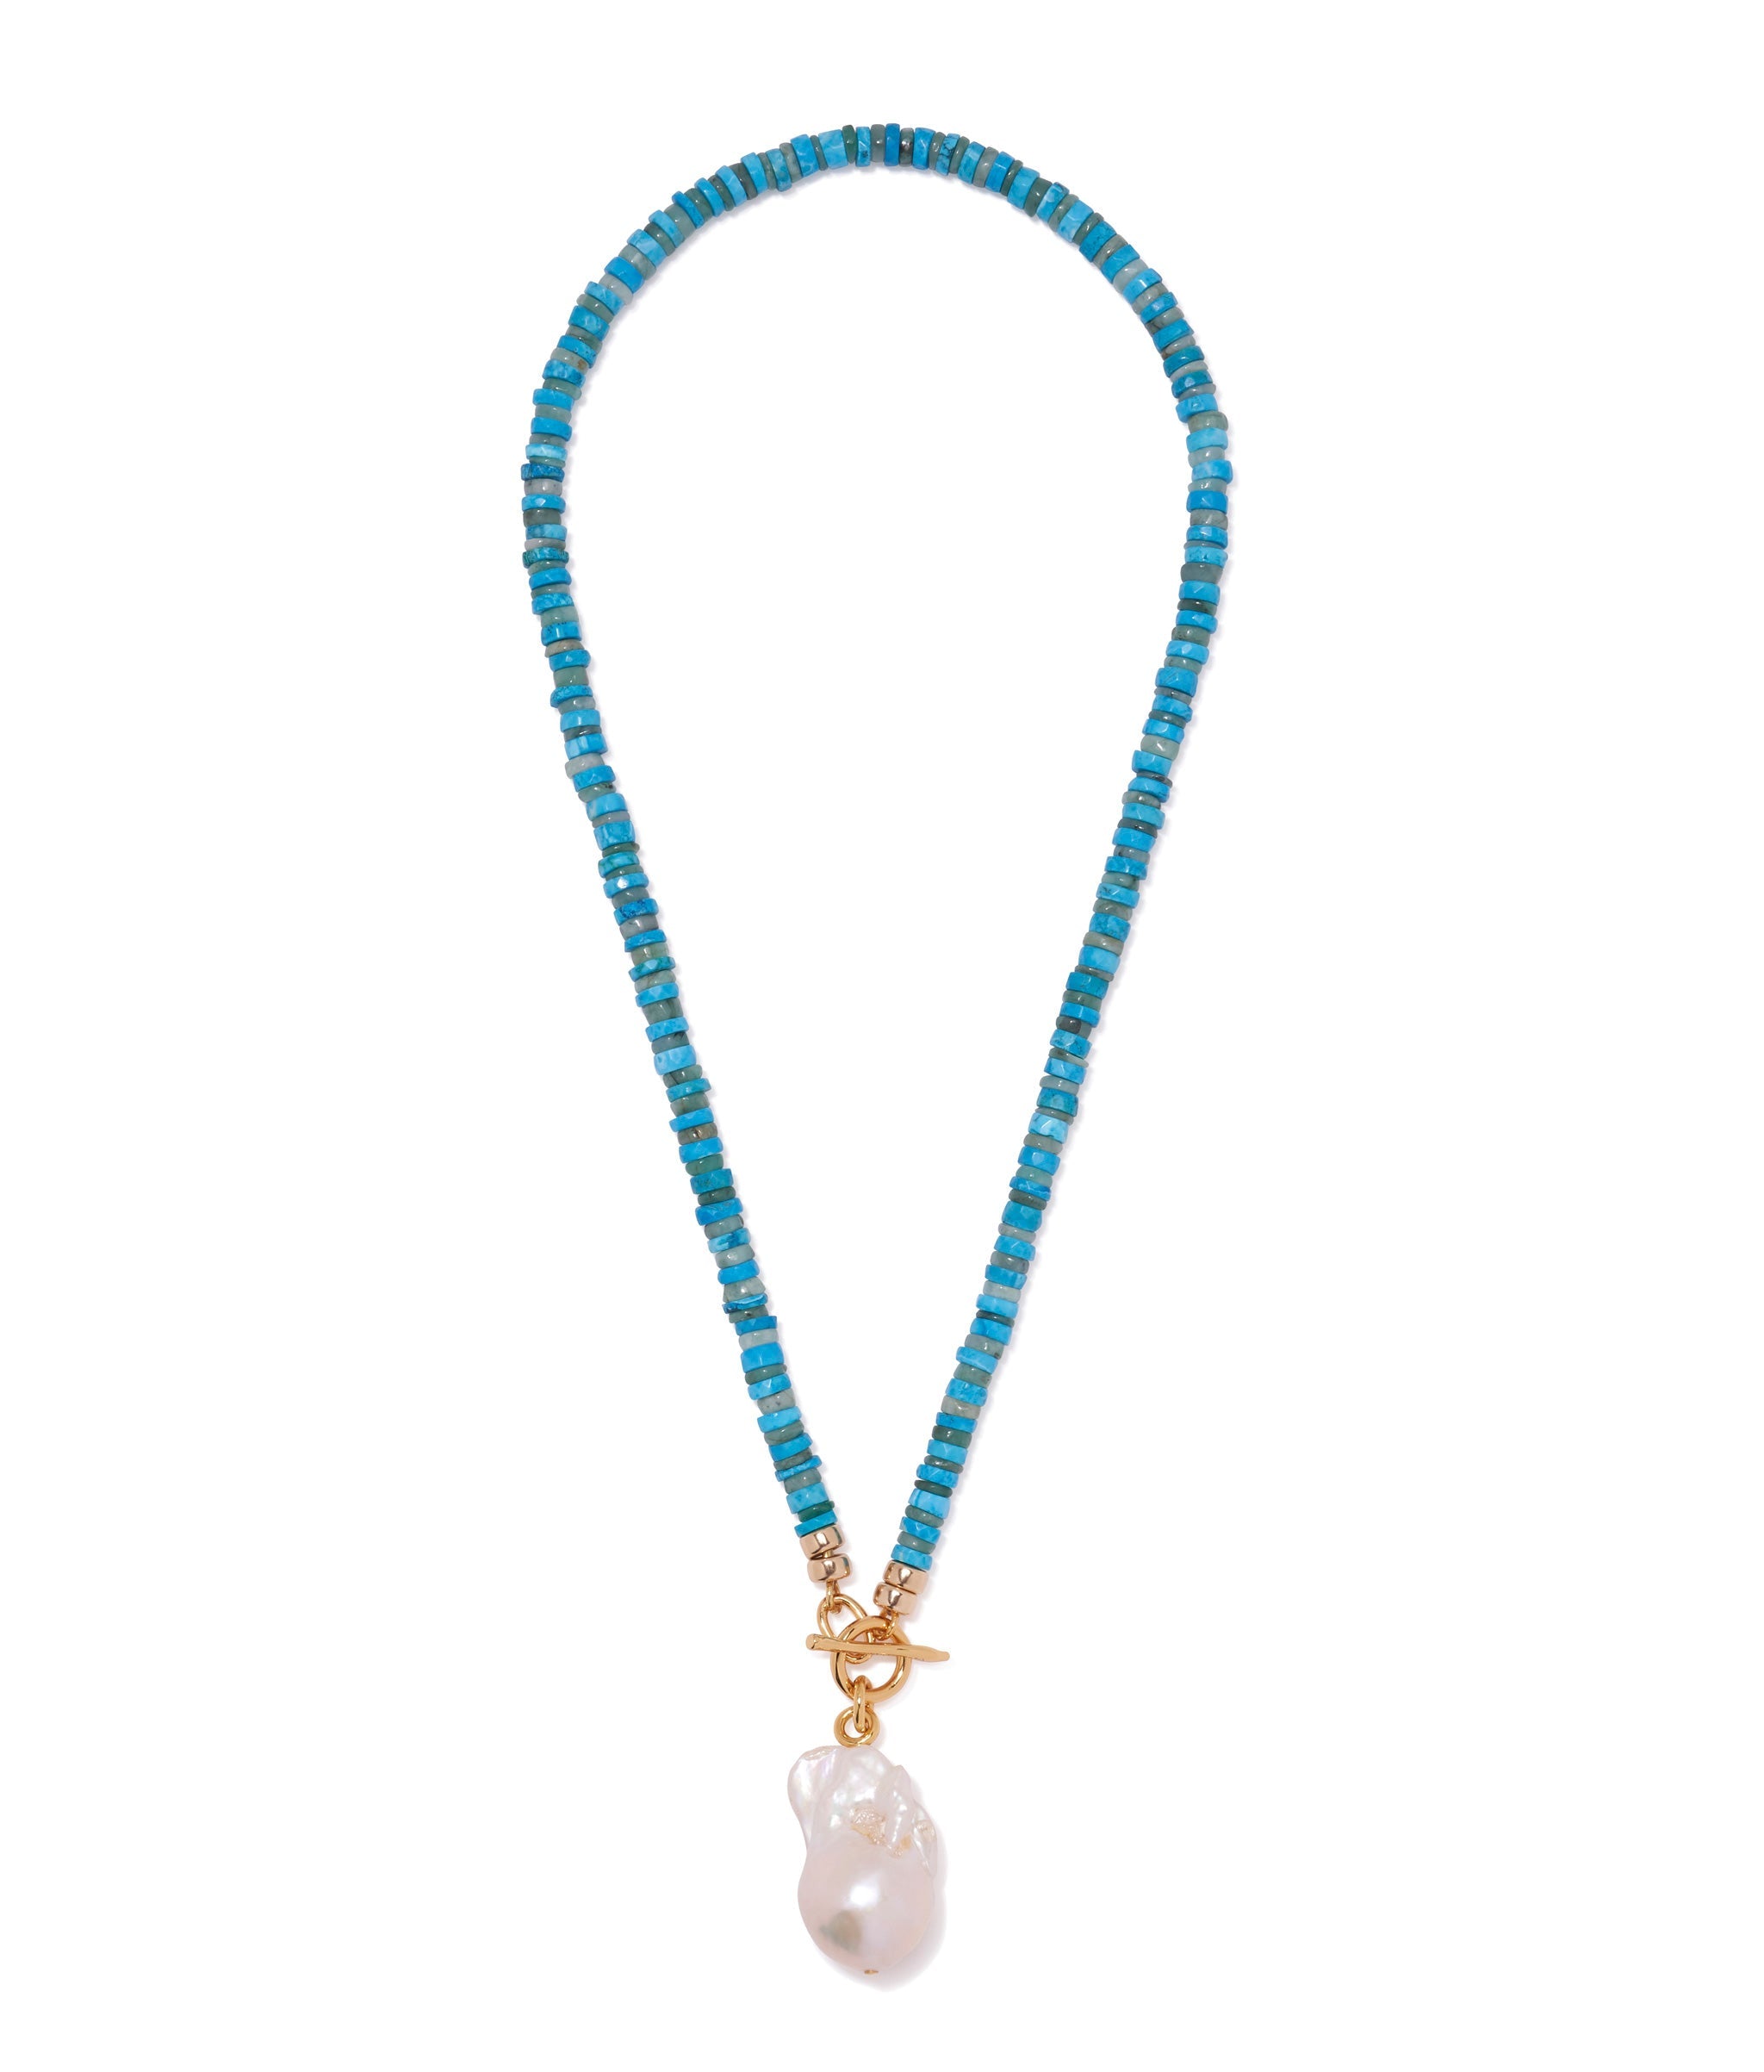 Pearl Isle Necklace